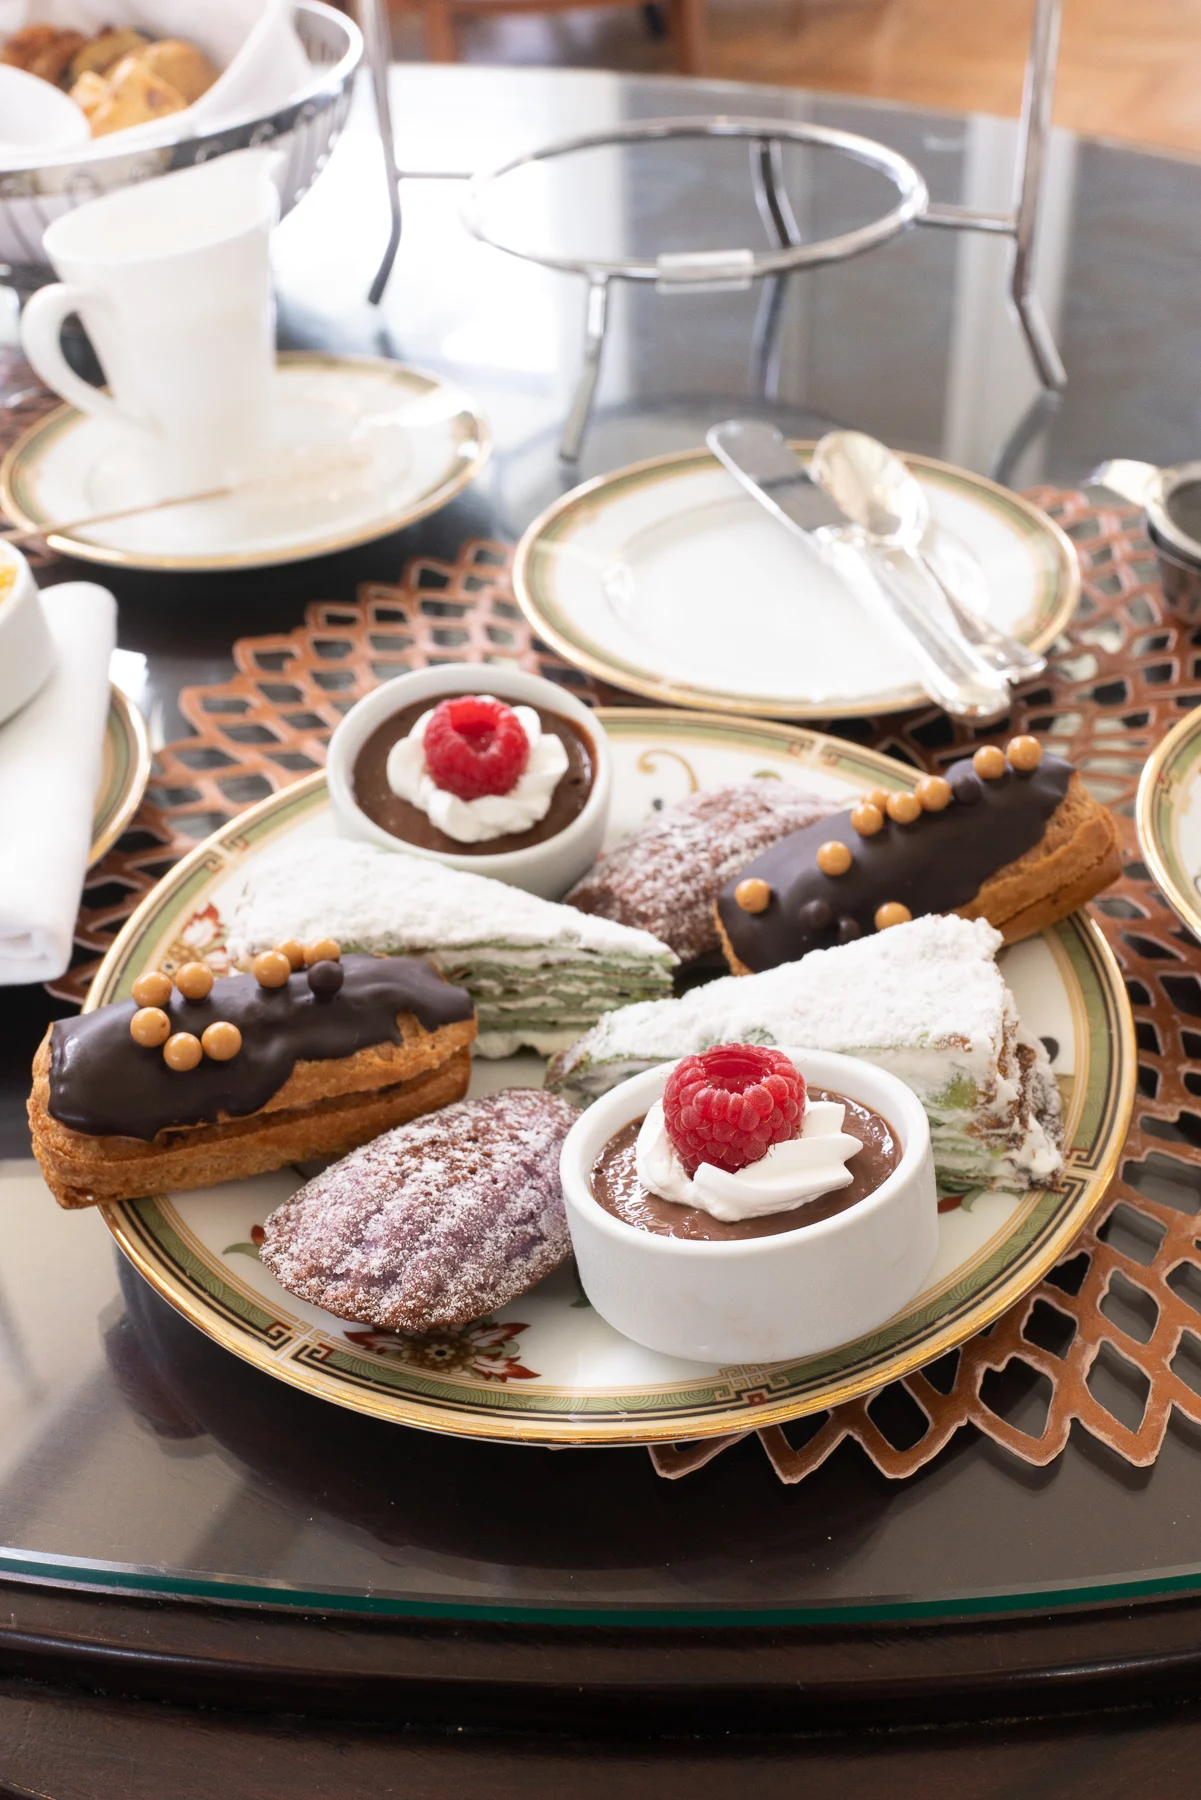 A plate of sweet items at Kahala Hotel’s afternoon tea.